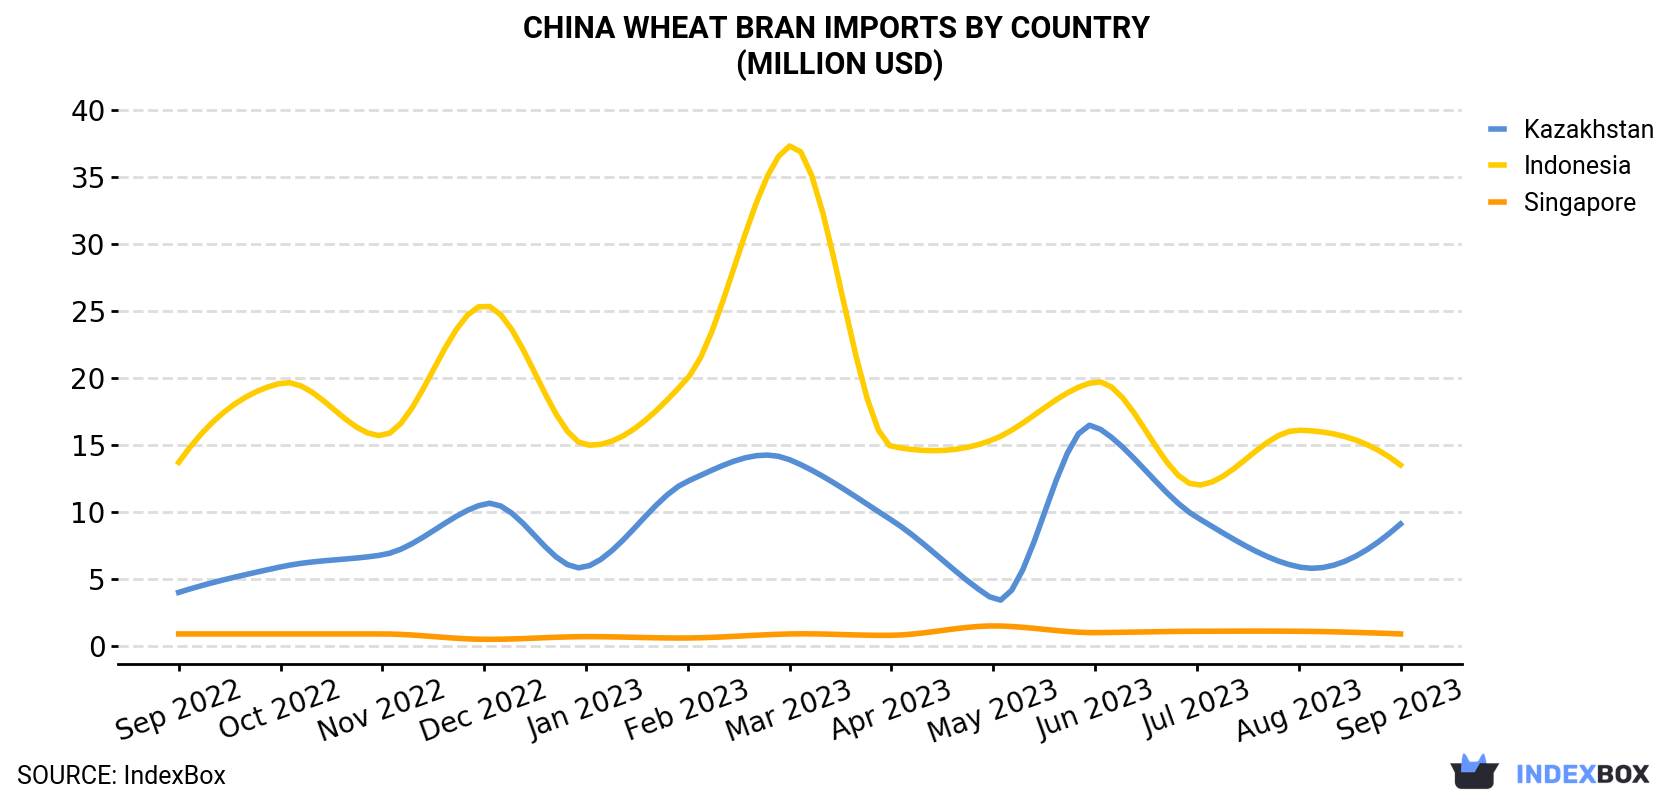 China Wheat Bran Imports By Country (Million USD)